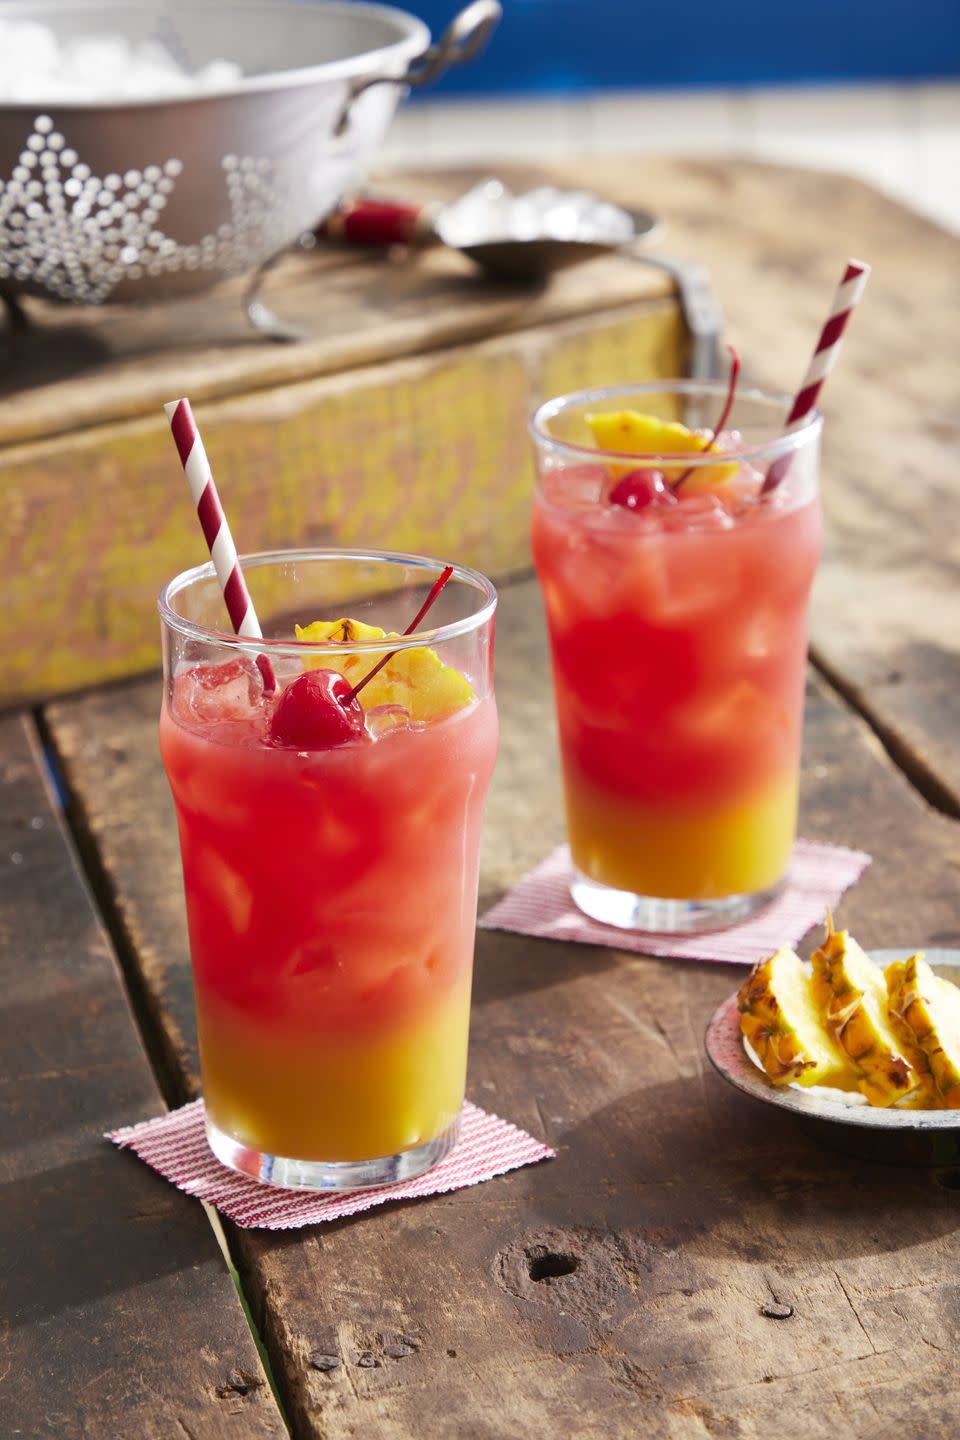 sailors warning cocktail in glasses with ice and garnished with a cherry and slice of pineapple